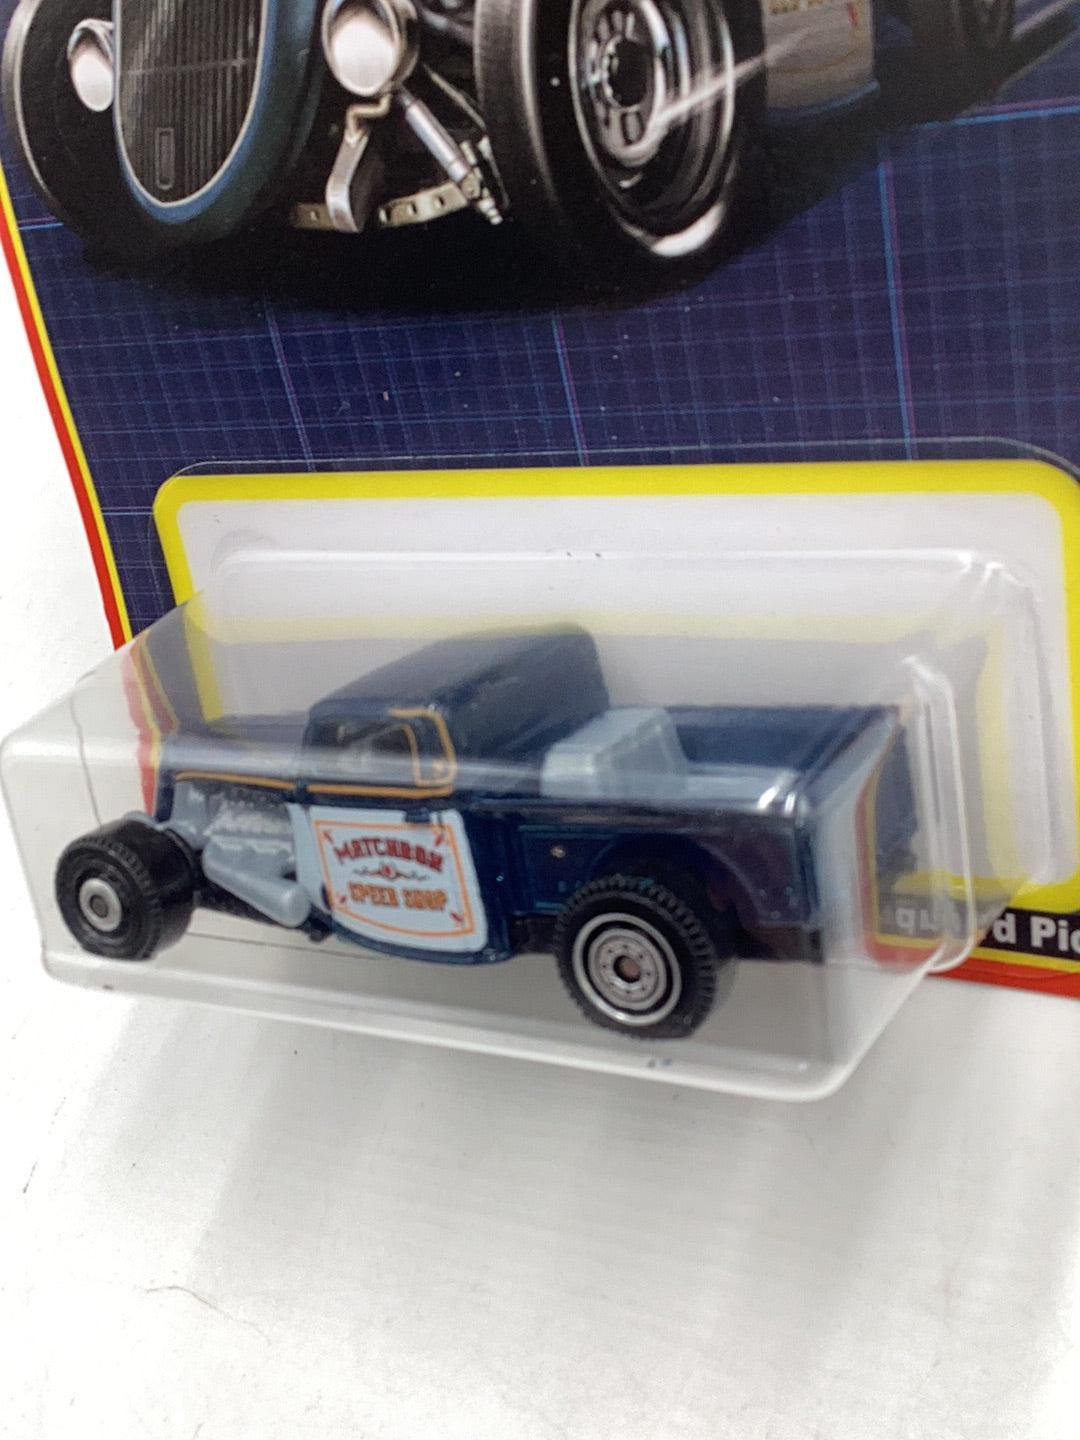 2022 Matchbox Retro Series #7 1935 Ford Pickup Target exclusive EE2